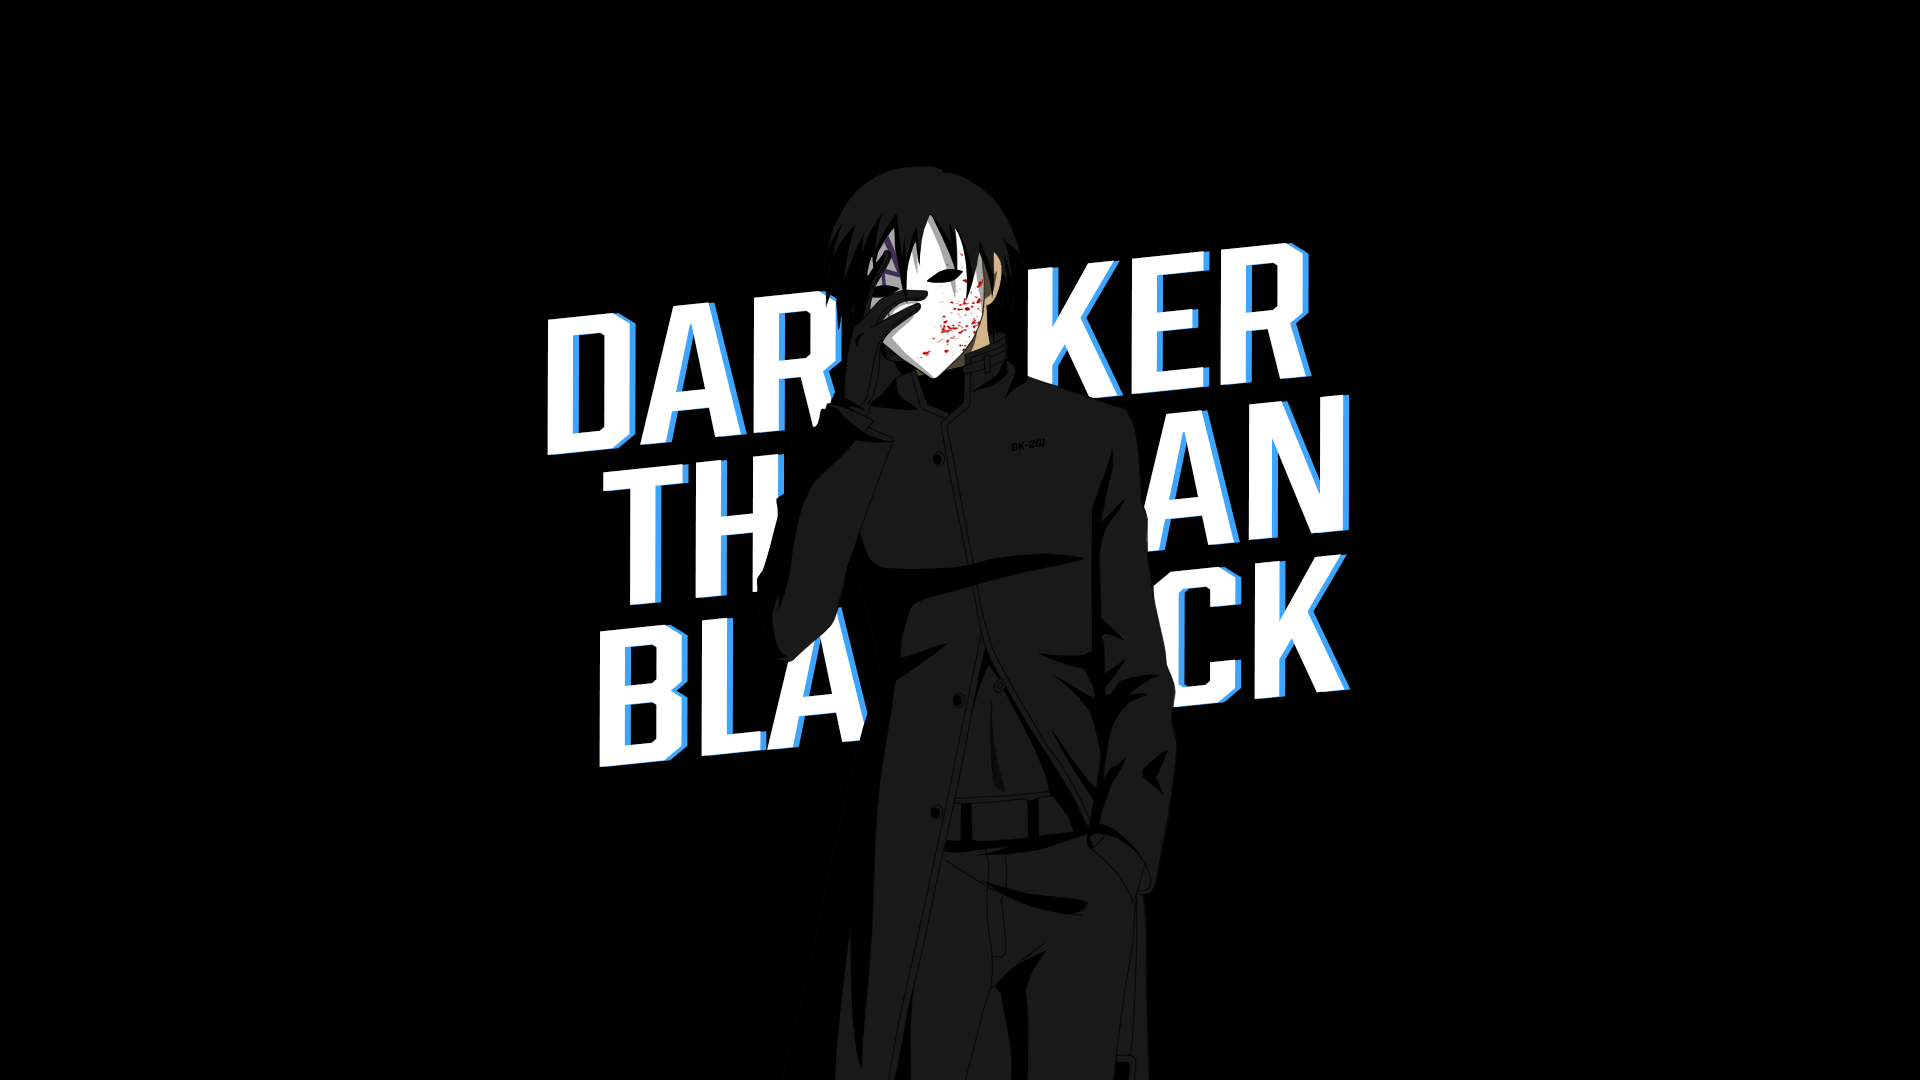 Anime 1920x1080 Darker than Black Hei anime anime boys typography mask selective coloring standing simple background